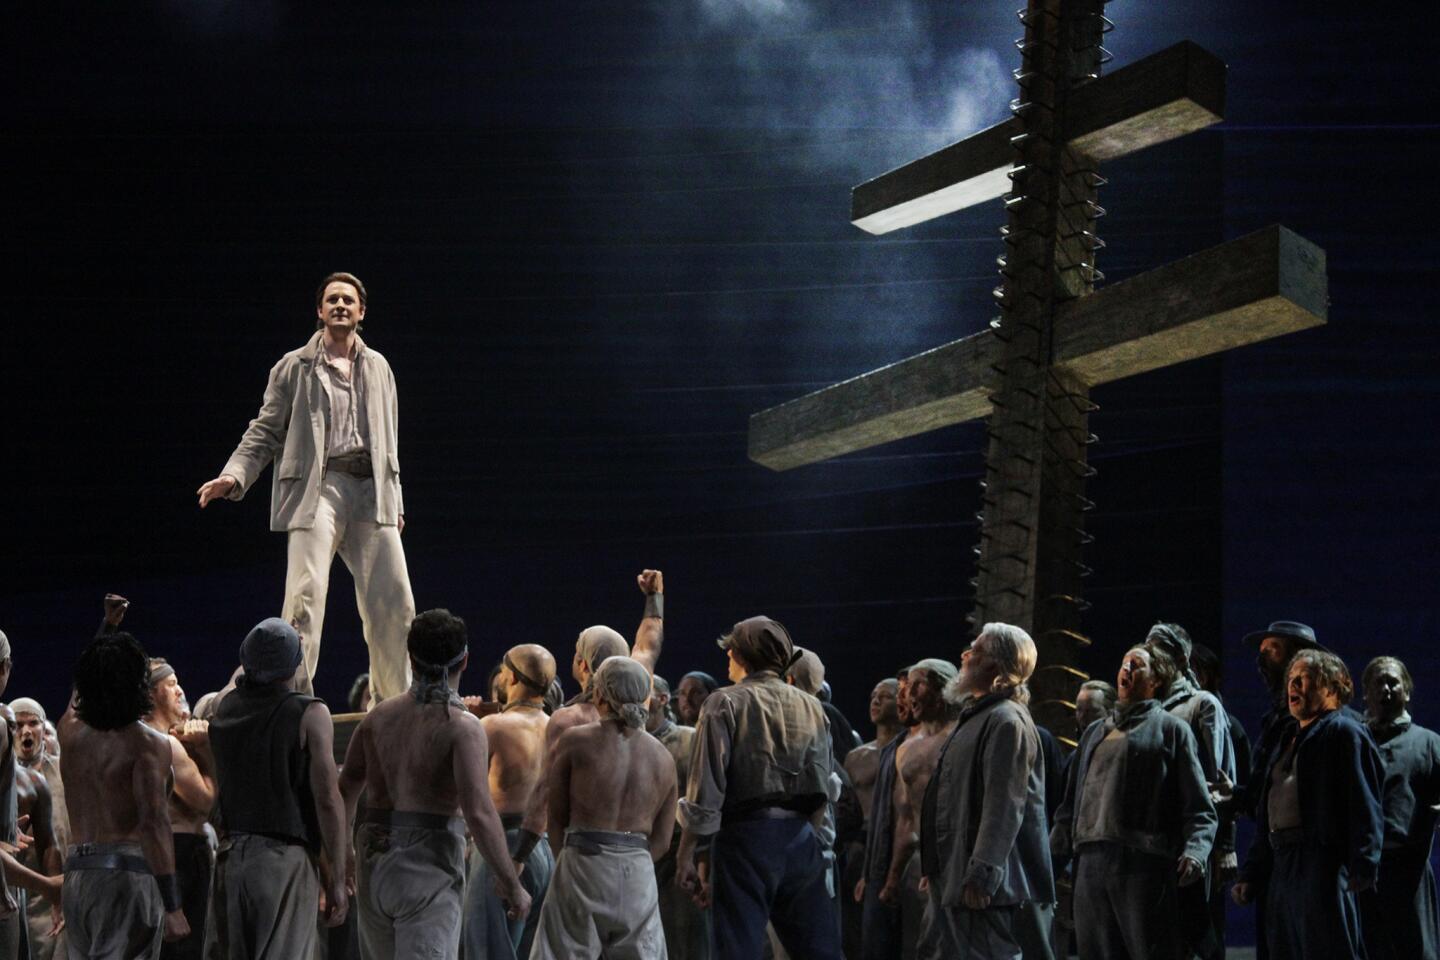 Liam Bonner as Billy Budd with the cast L.A. Opera's production "Billy Budd" at the Dorothy Chandler Pavilion in Los Angeles.